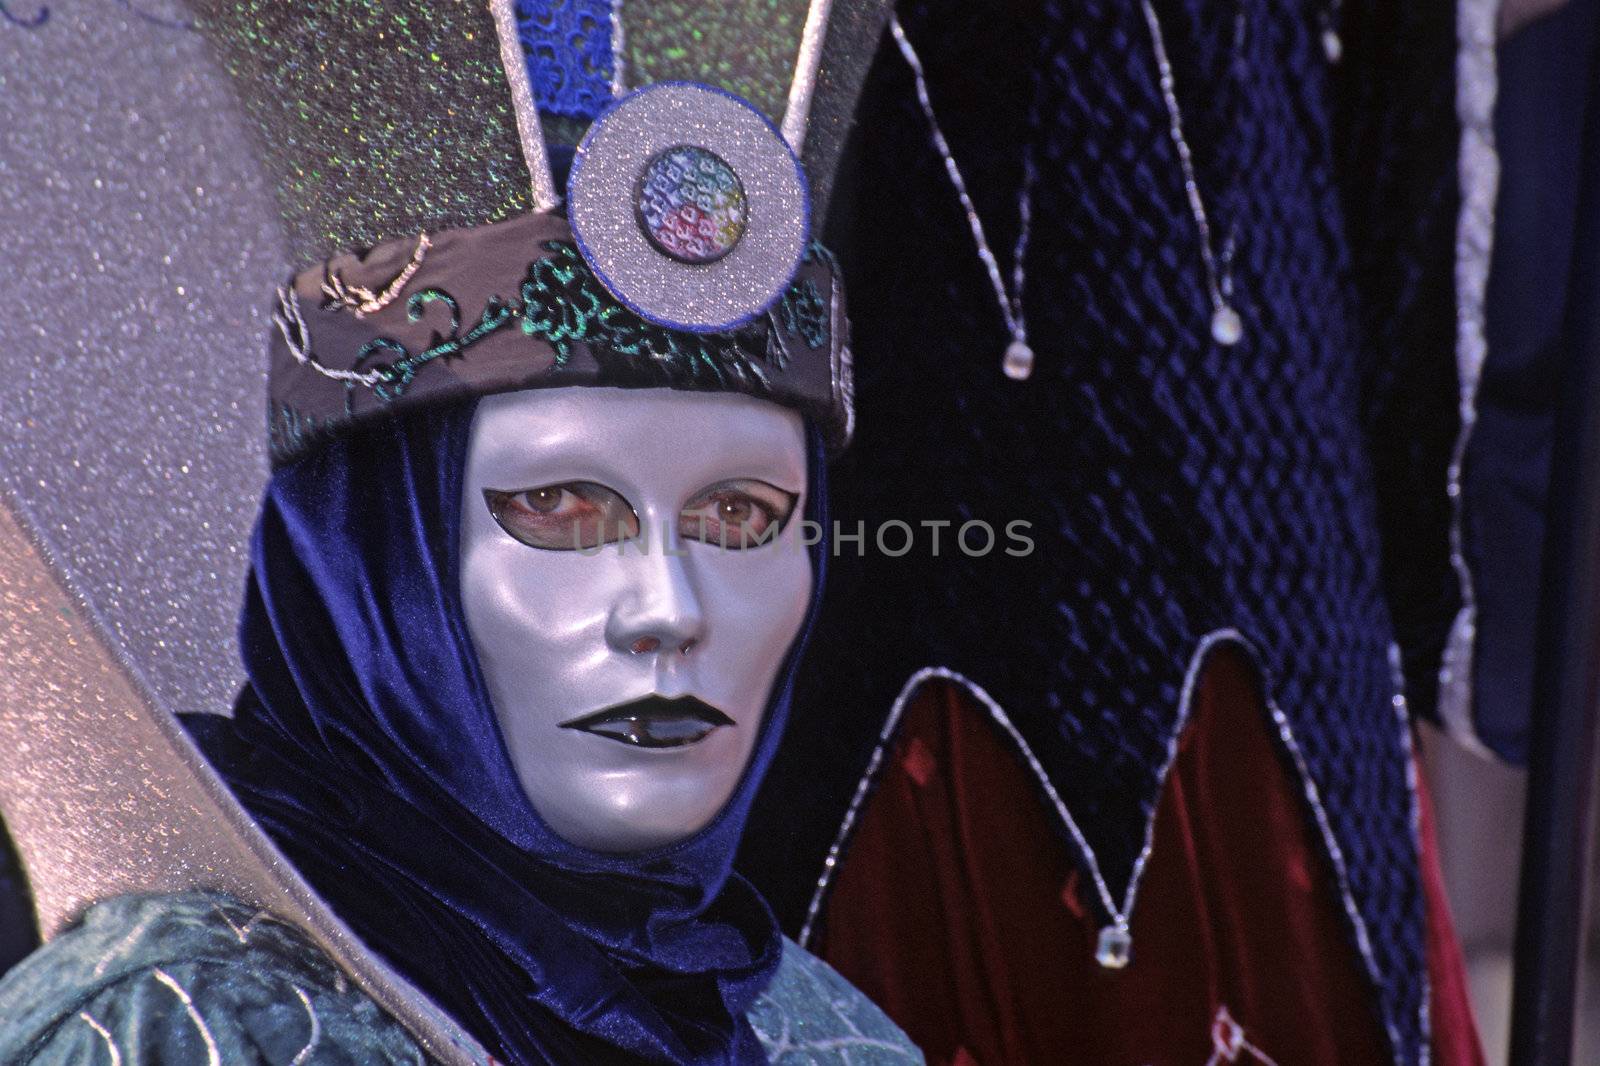 Carnival in Venice, Mask 142 by Natureandmore